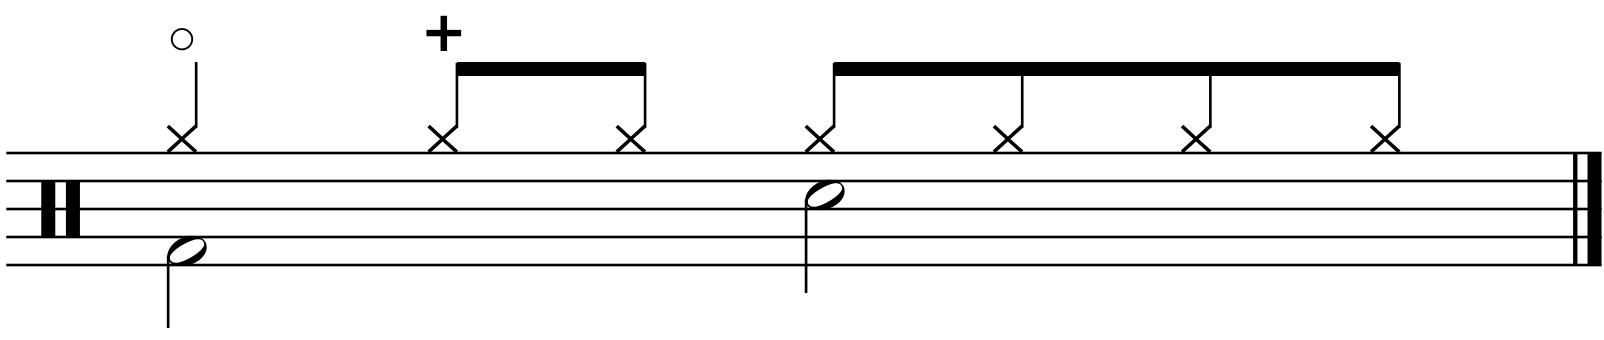 A half time groove with an open hi hat on count 1.